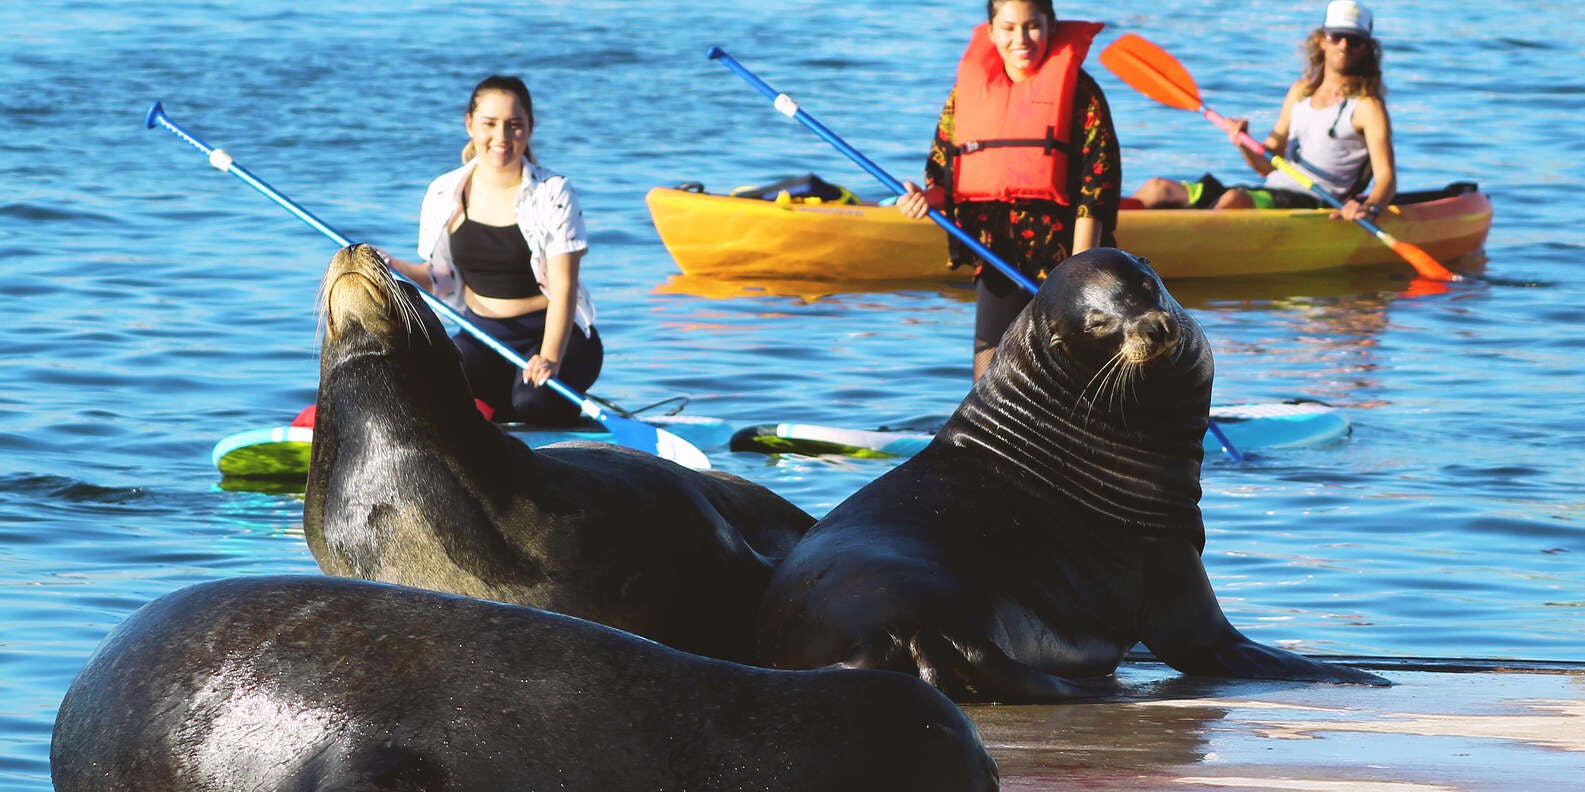 What About Kayaks, Do Sea Lions Attack kayaks?